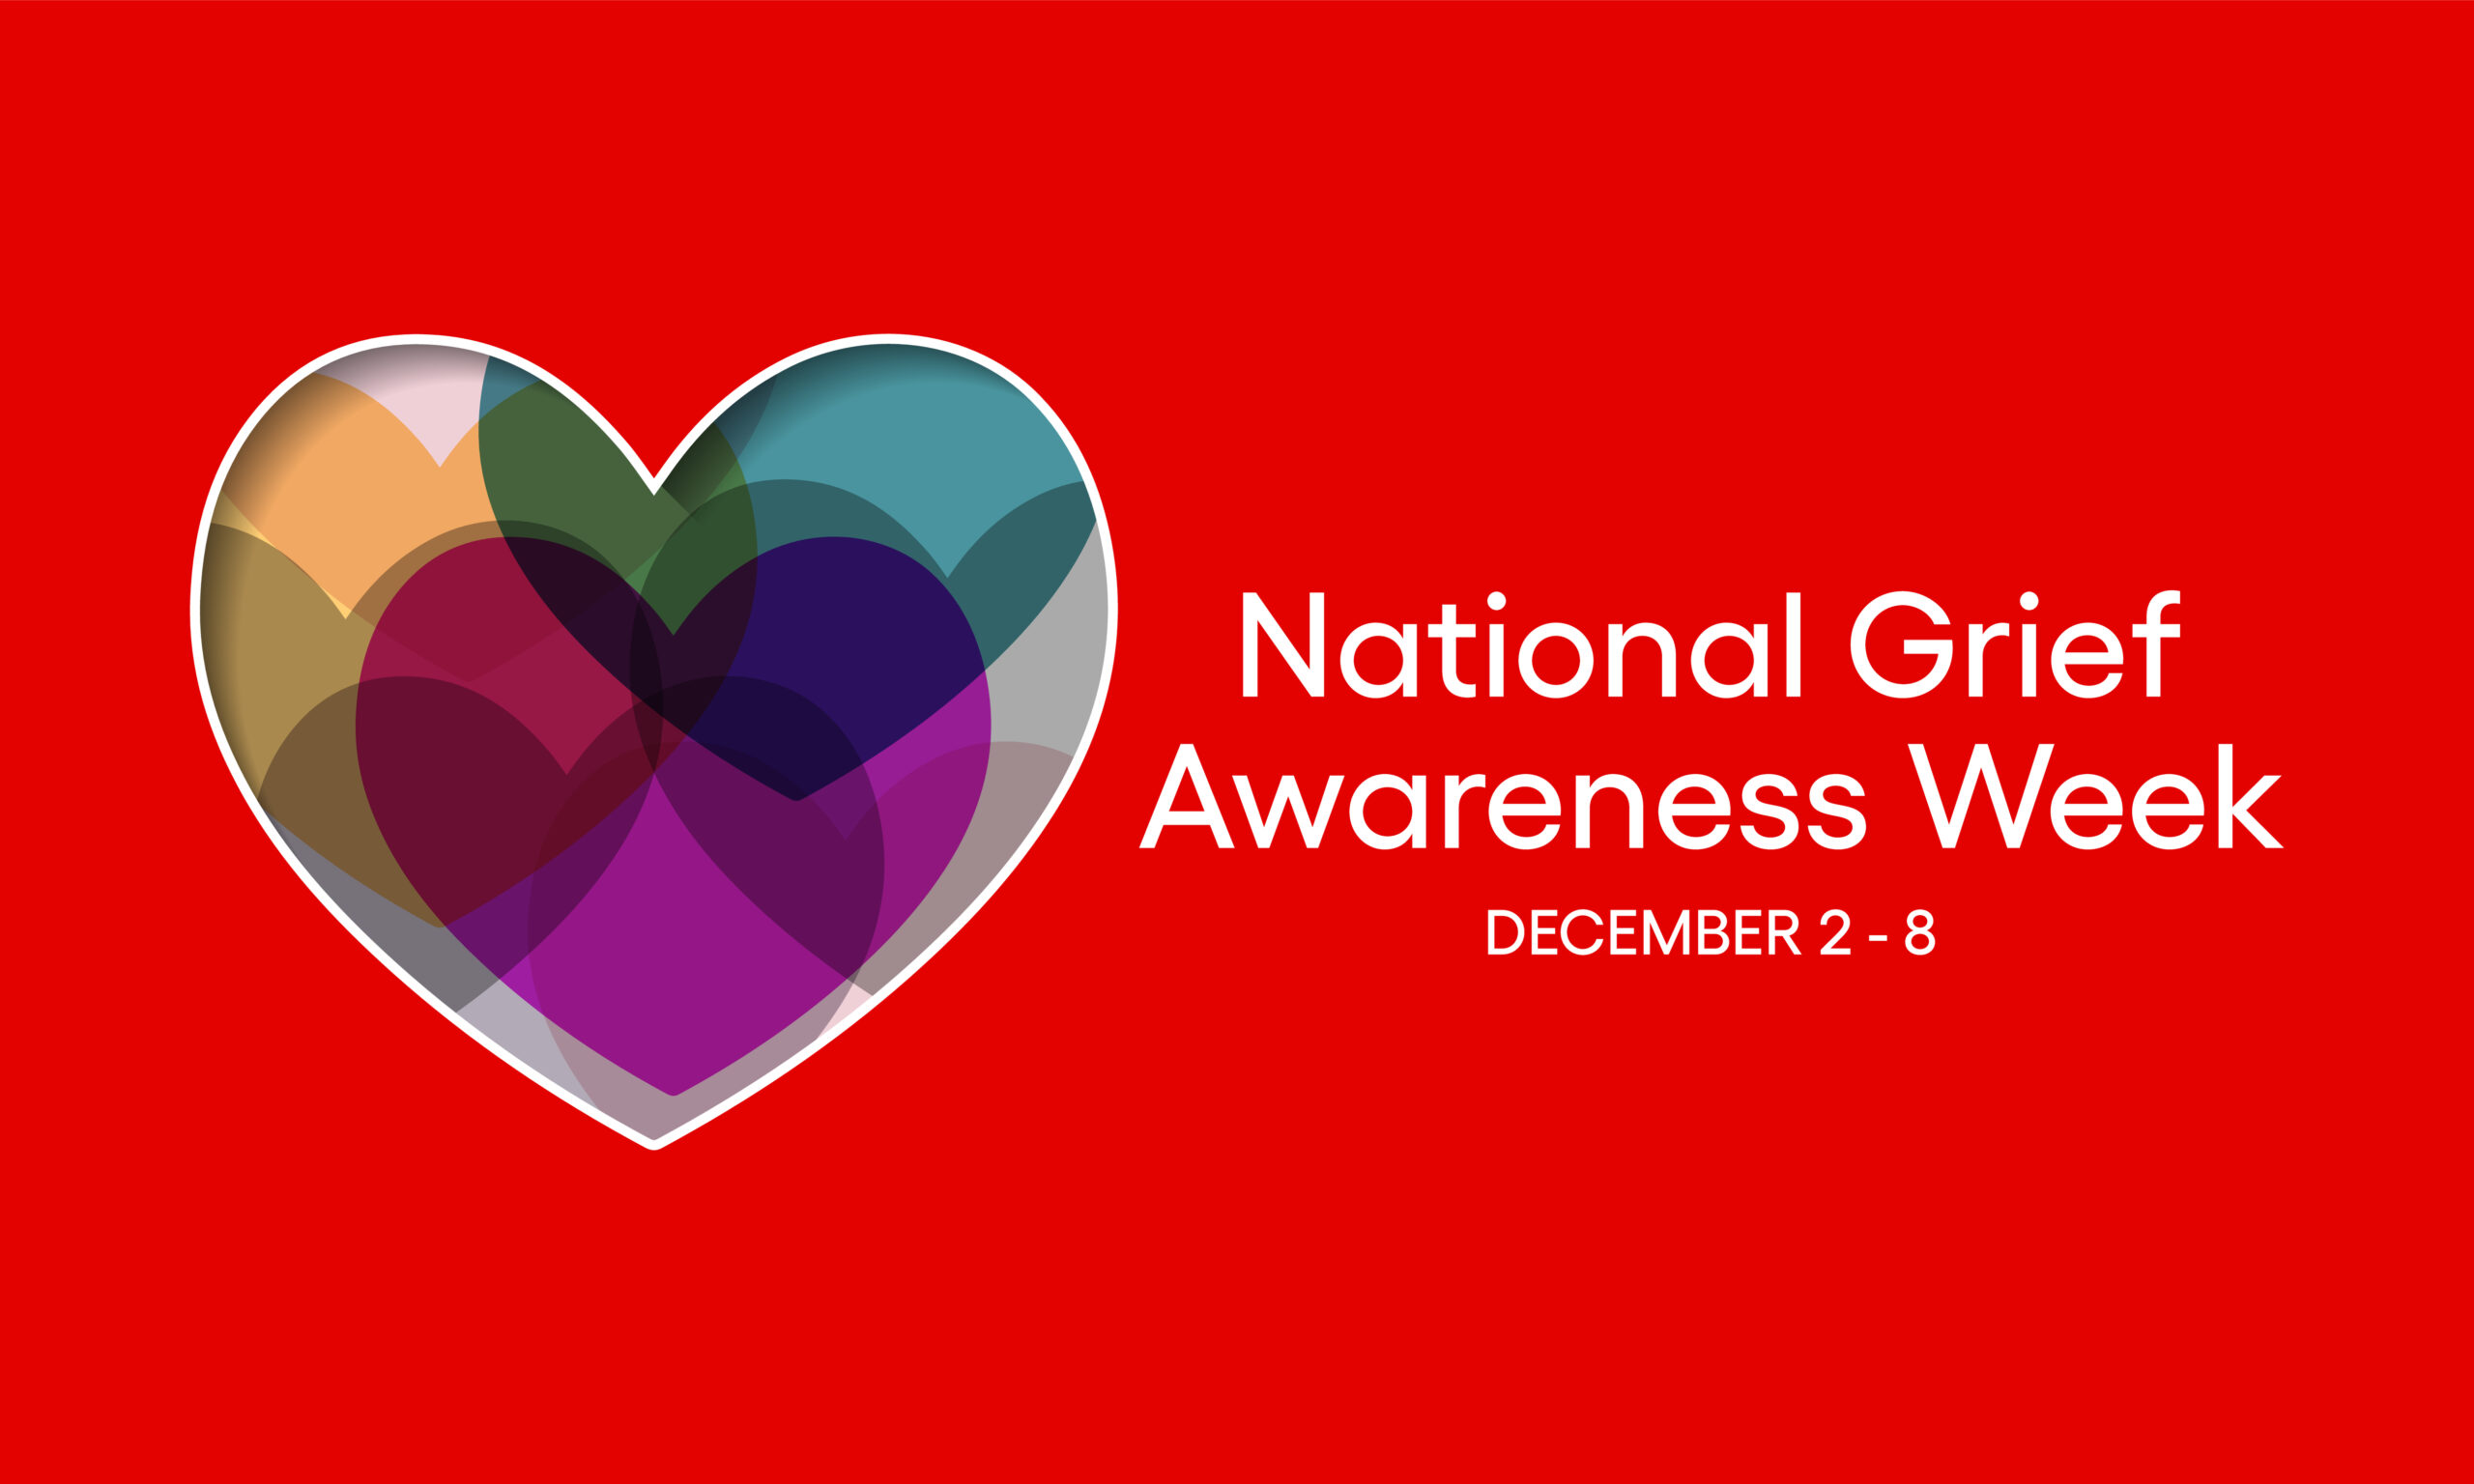 National Grief Awareness Week 2-8th December on red background with heart icon